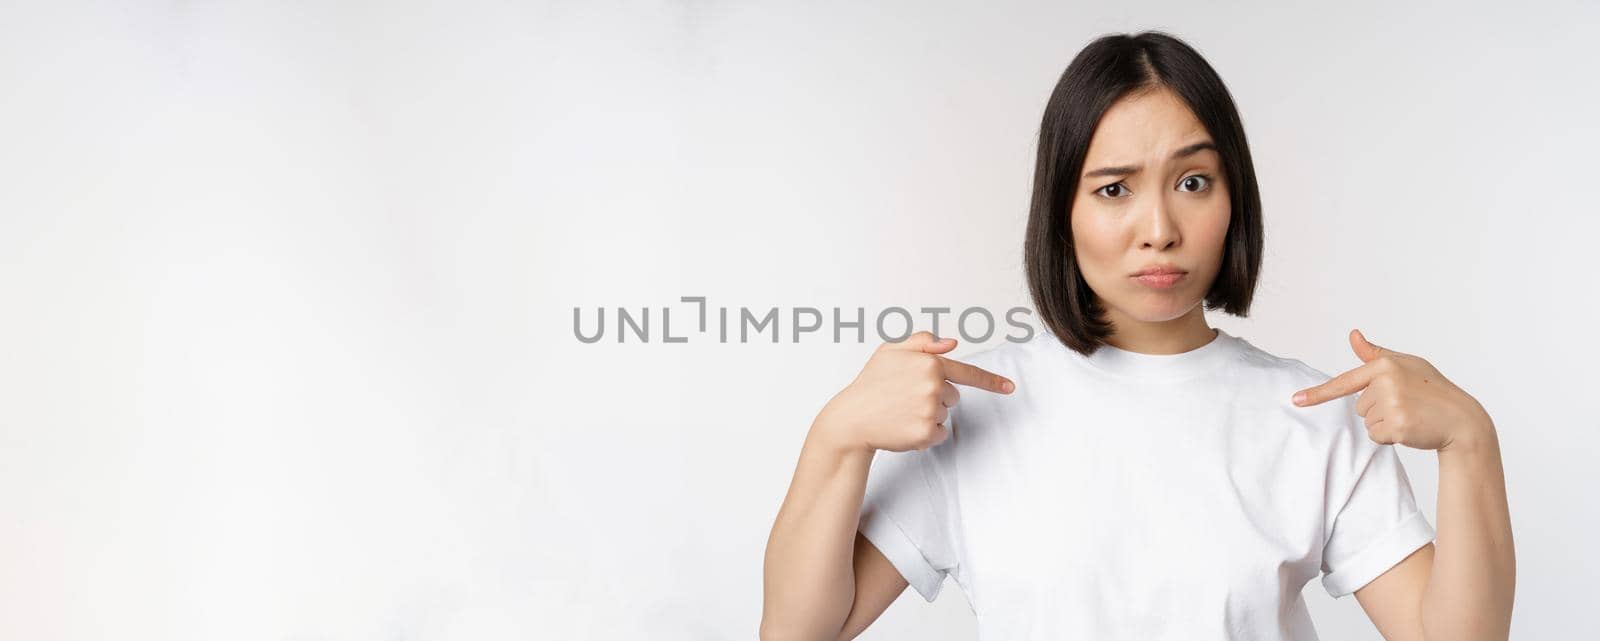 Young asian woman pointing at herself with disbelief, being chosen, surprised by her candidature, standing over white background.